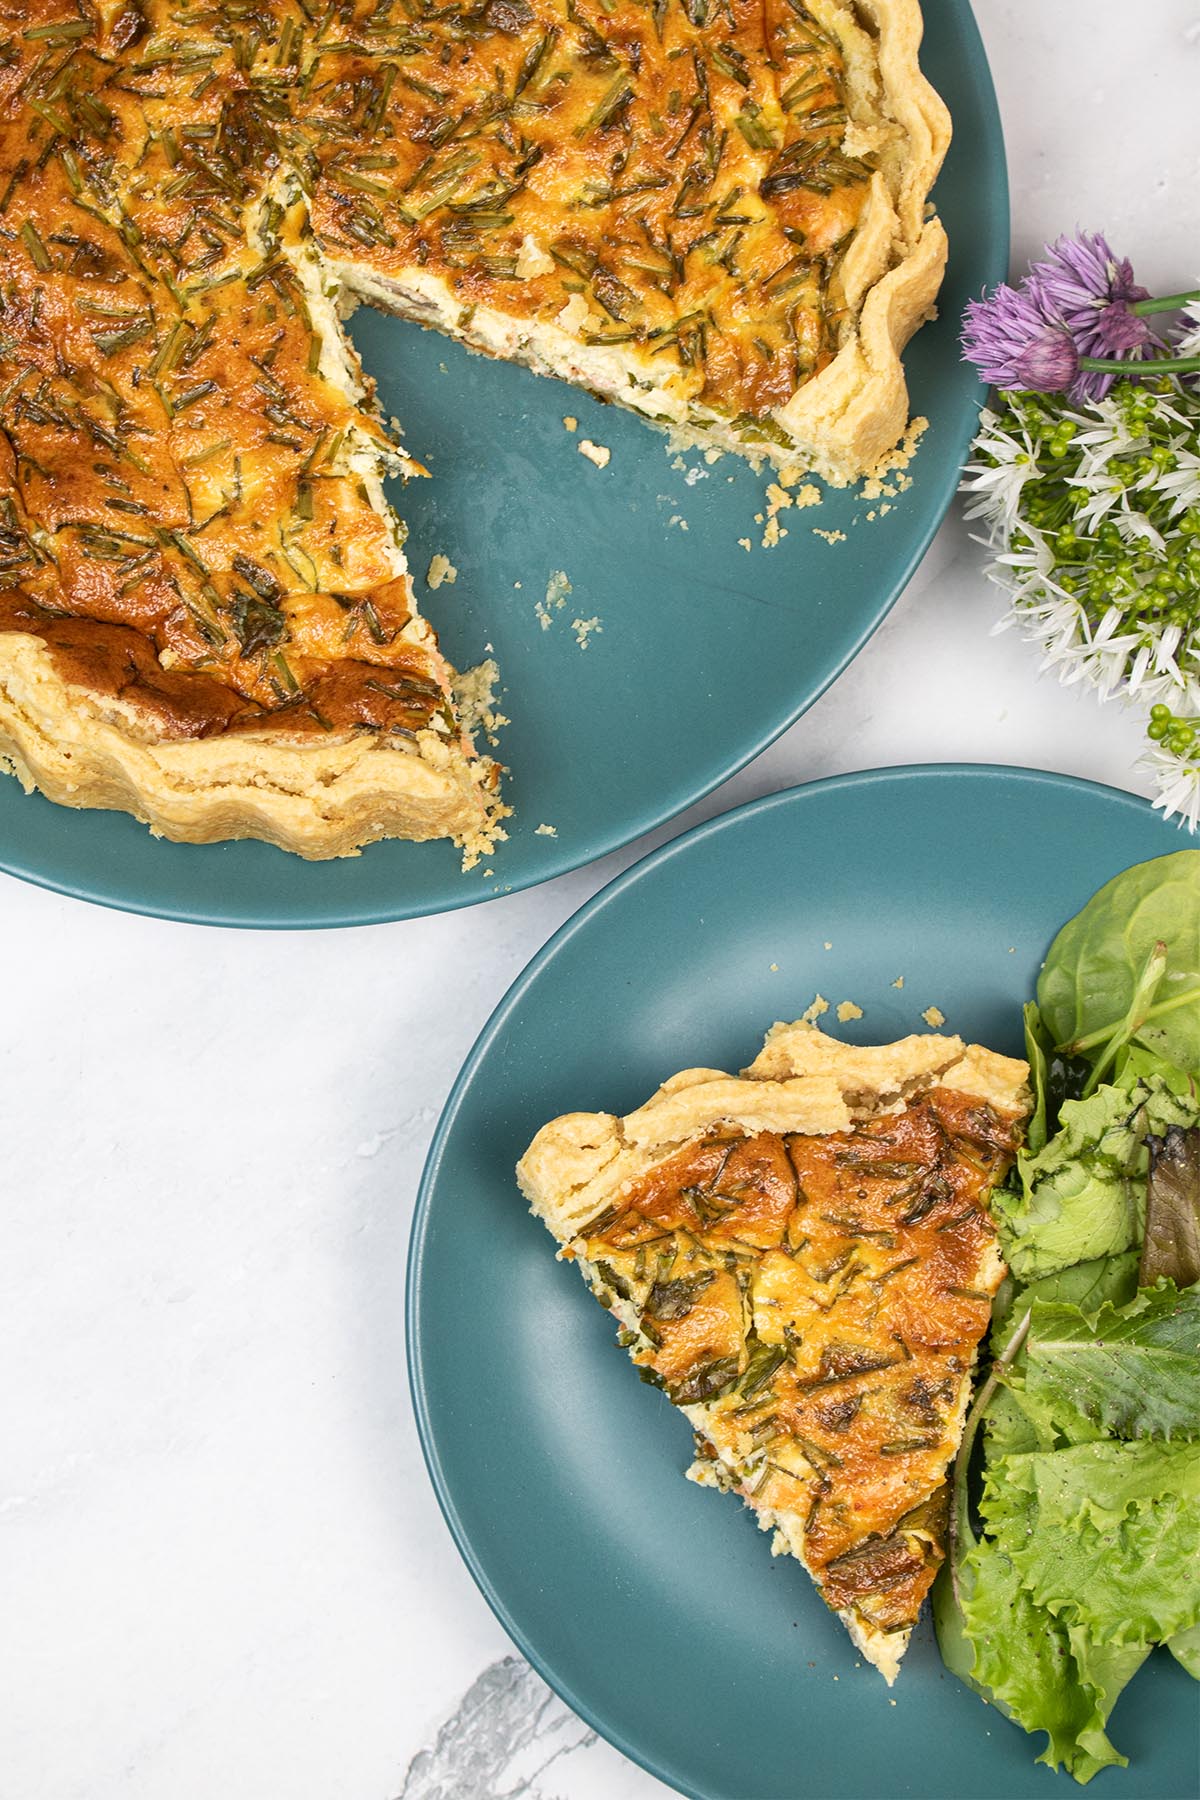 Quiche on dark green plates - one with a slice and salad, with a bunch of wild garlic and chive flowers at the side.